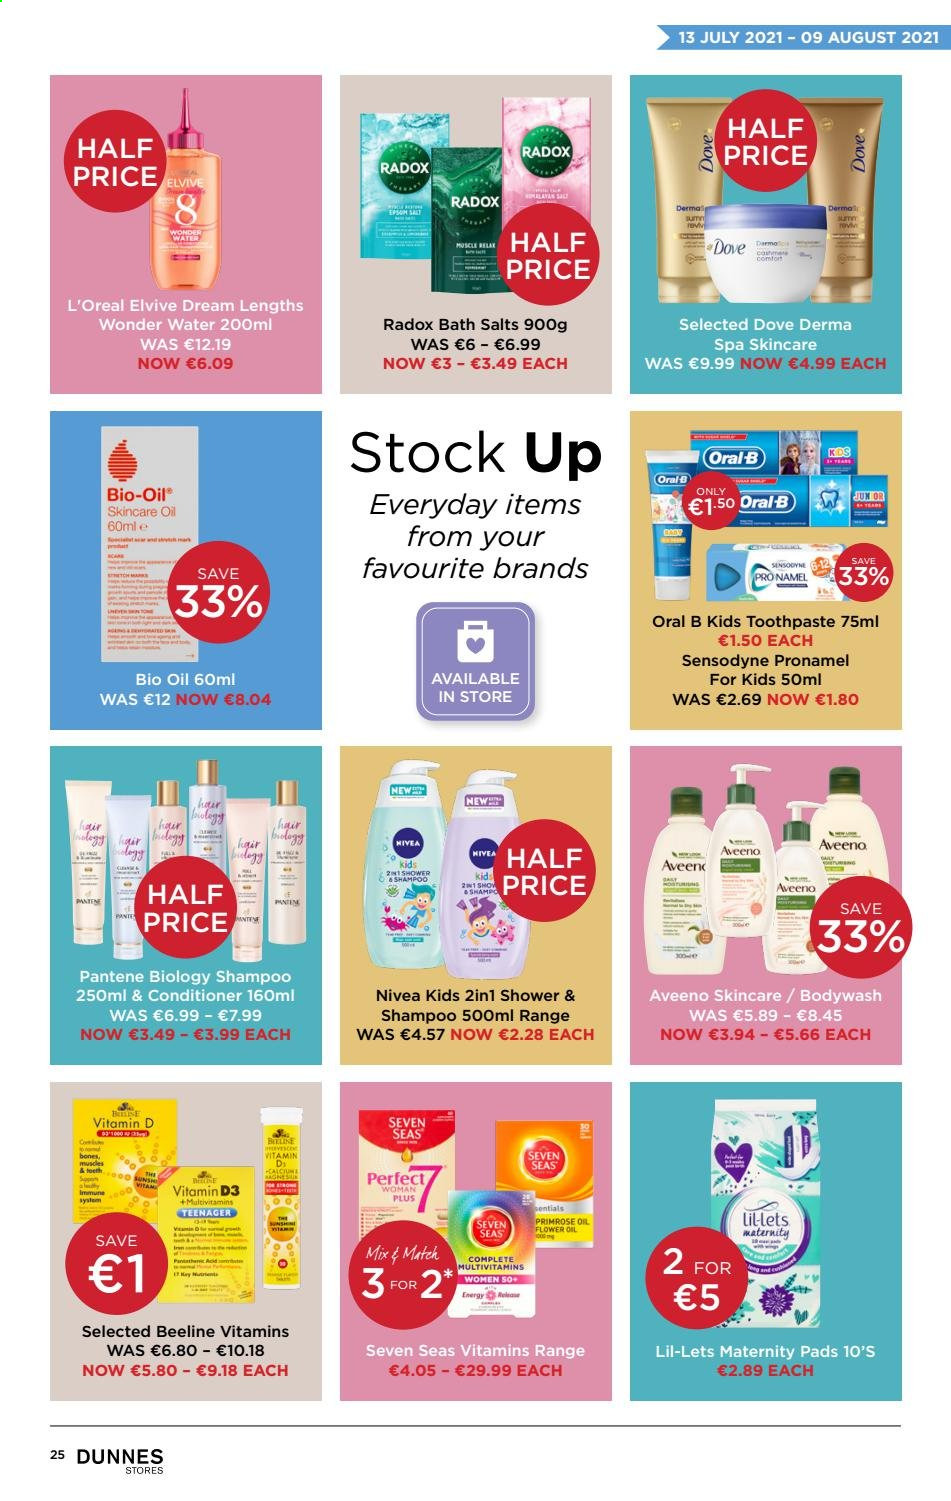 thumbnail - Dunnes Stores offer  - 13.07.2021 - 09.08.2021 - Sales products - oil, tea, Aveeno, Nivea, Dove, shampoo, Radox, Oral-B, toothpaste, Sensodyne, Lil-lets, L’Oréal, conditioner, Pantene, multivitamin, vitamin D3. Page 25.